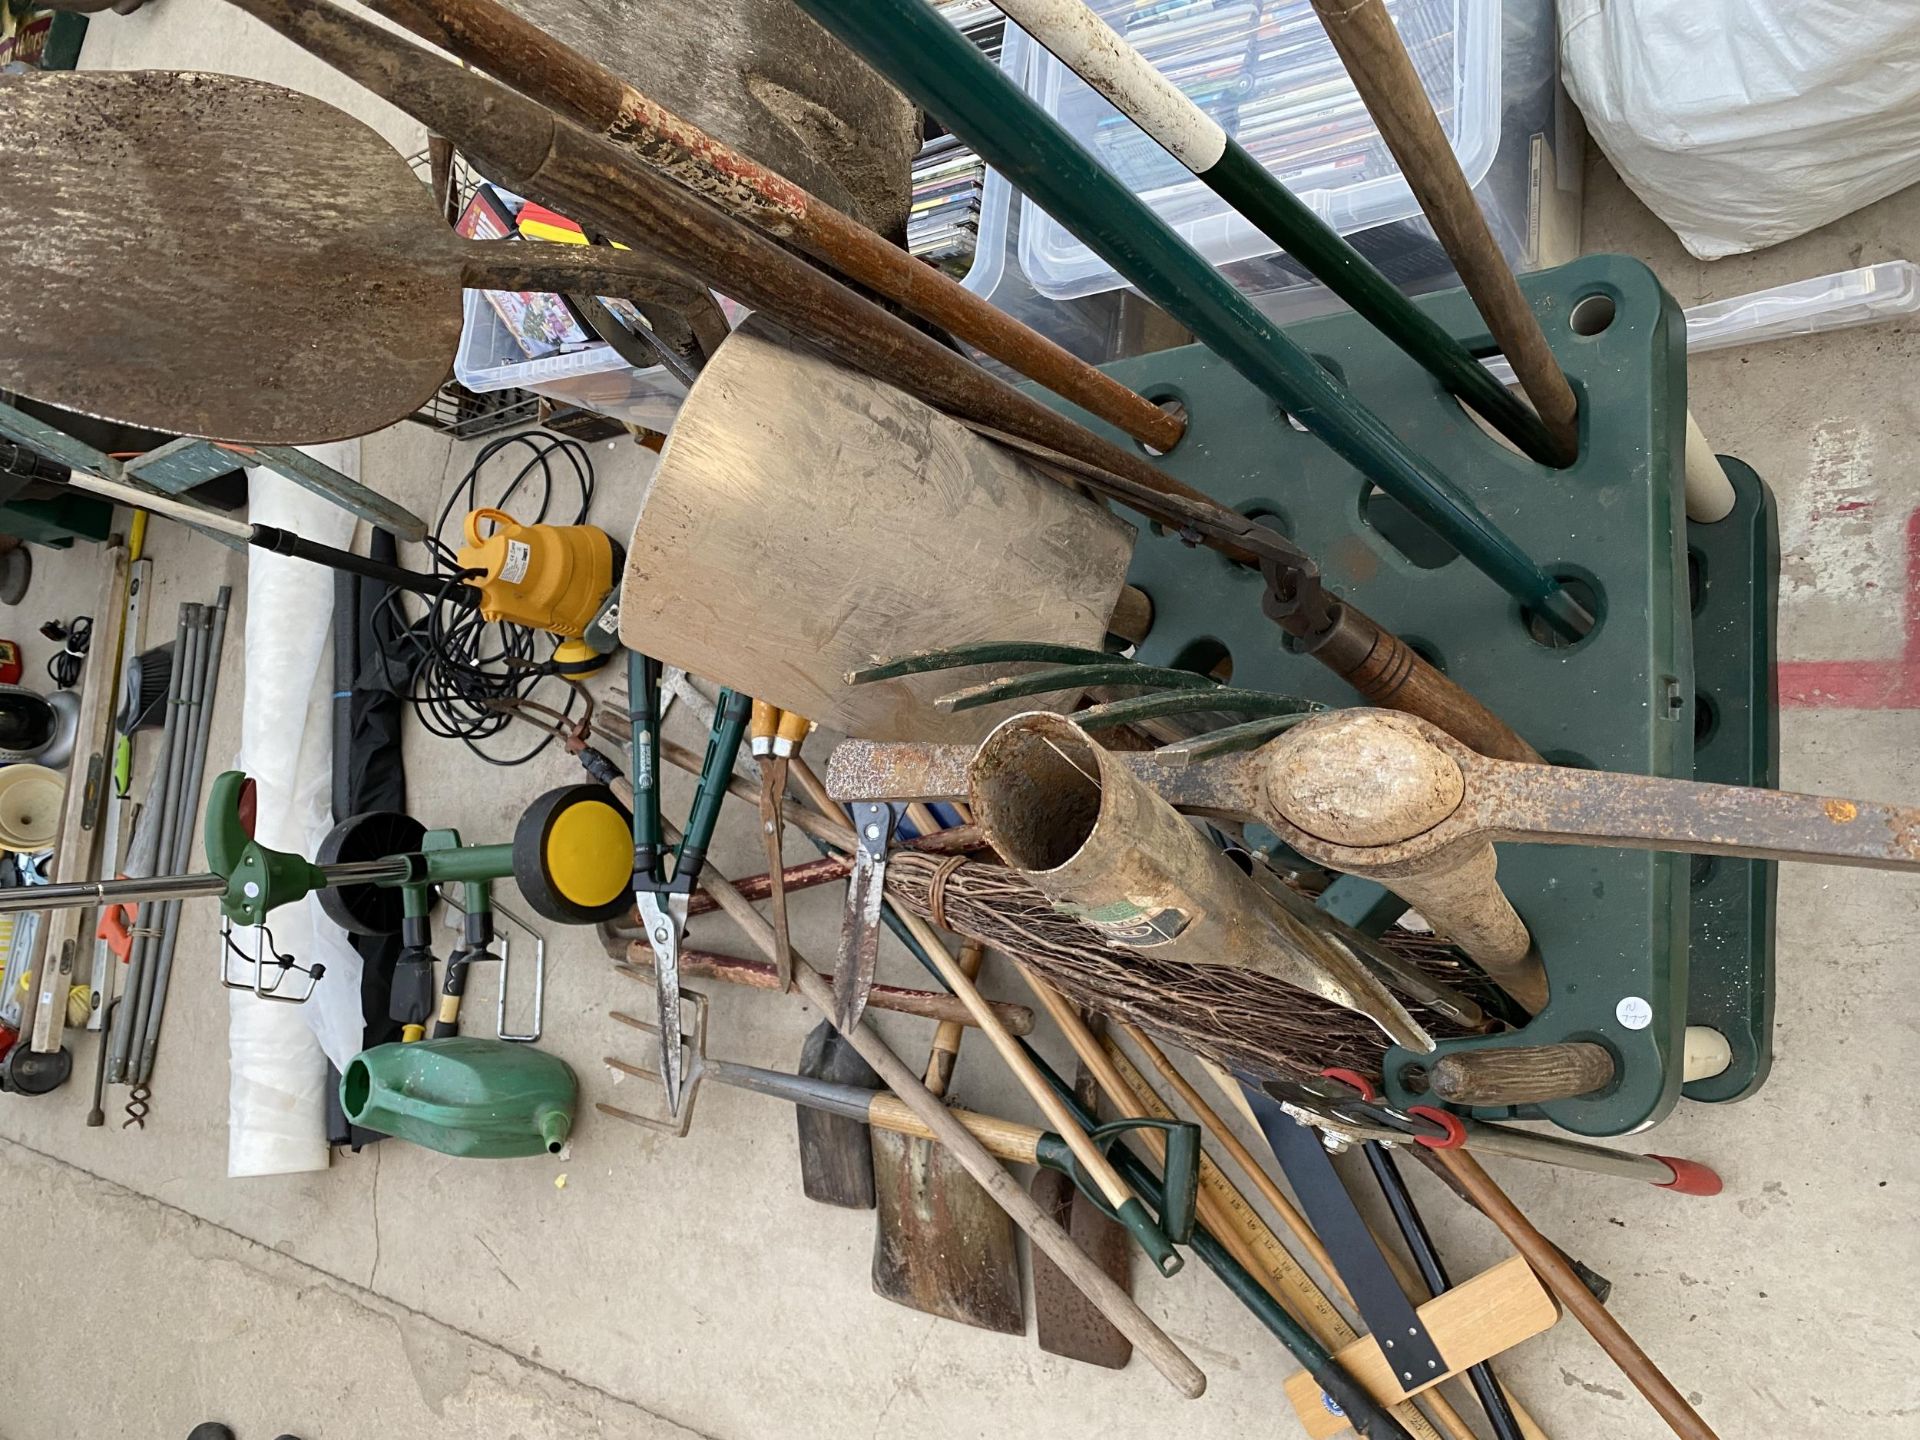 A LARGE ASSORTMENT OF GARDEN TOOLS TO INCLUDE A PICK AXE, FORKS AND RAKES TO ALSO INCLUDE A PLANT